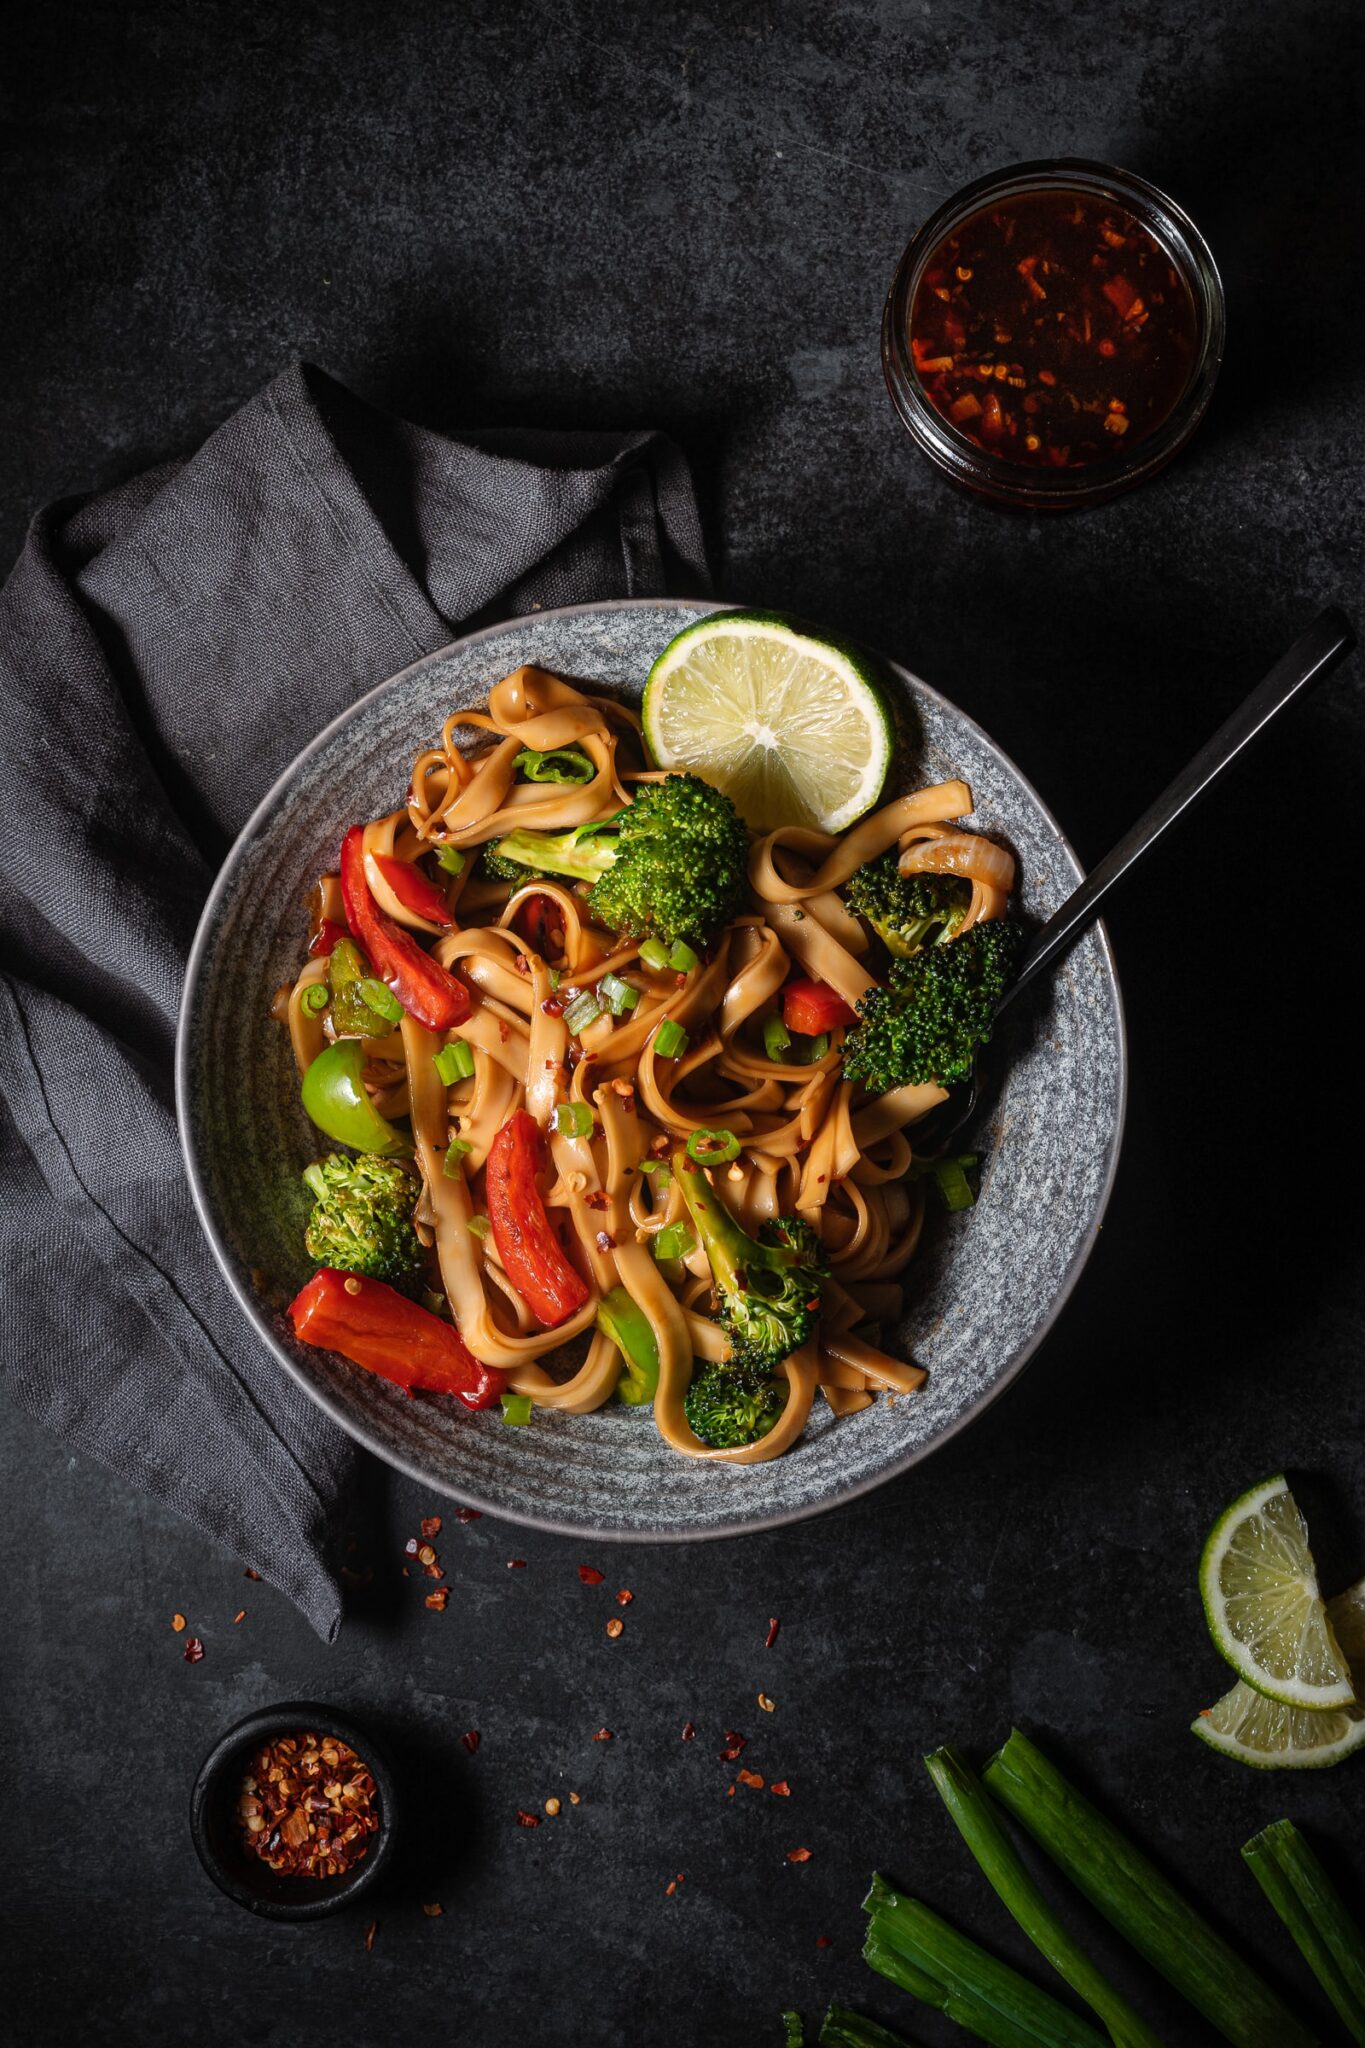 Vegetable stir fry in a bowl with stir fry sauce.